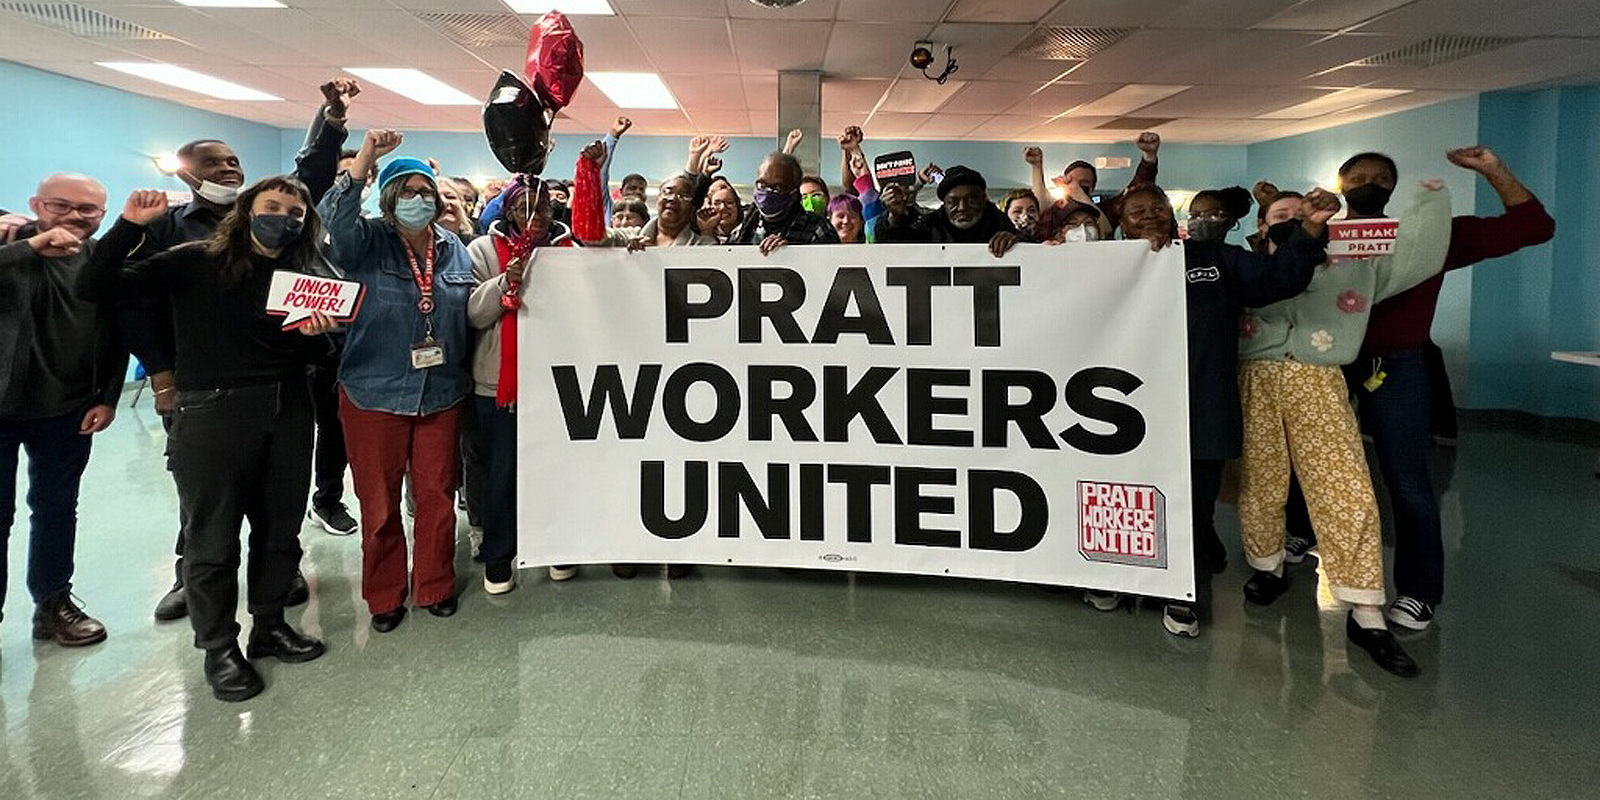 Workers at Pratt libraries in Baltimore join AFSCME Cultural Workers United 